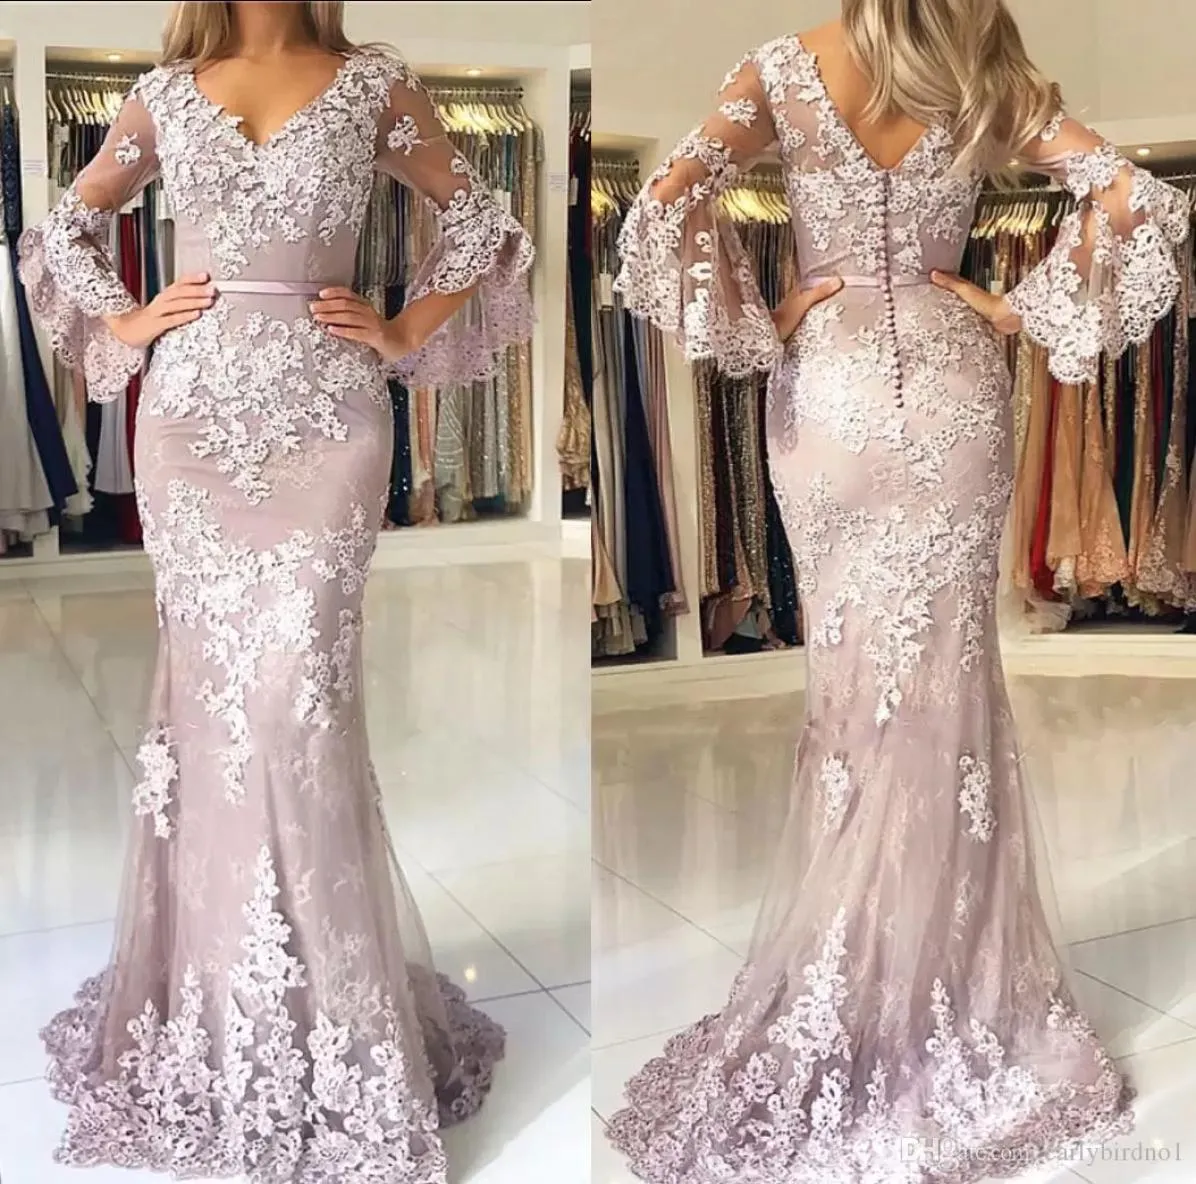 2018 Modest Dusty Pink Prom Dresses Long Poet Sleeves Lace Applique V Neck Mermaid Sweep Train Ribbon Evening Formal Wear Custom M2135409